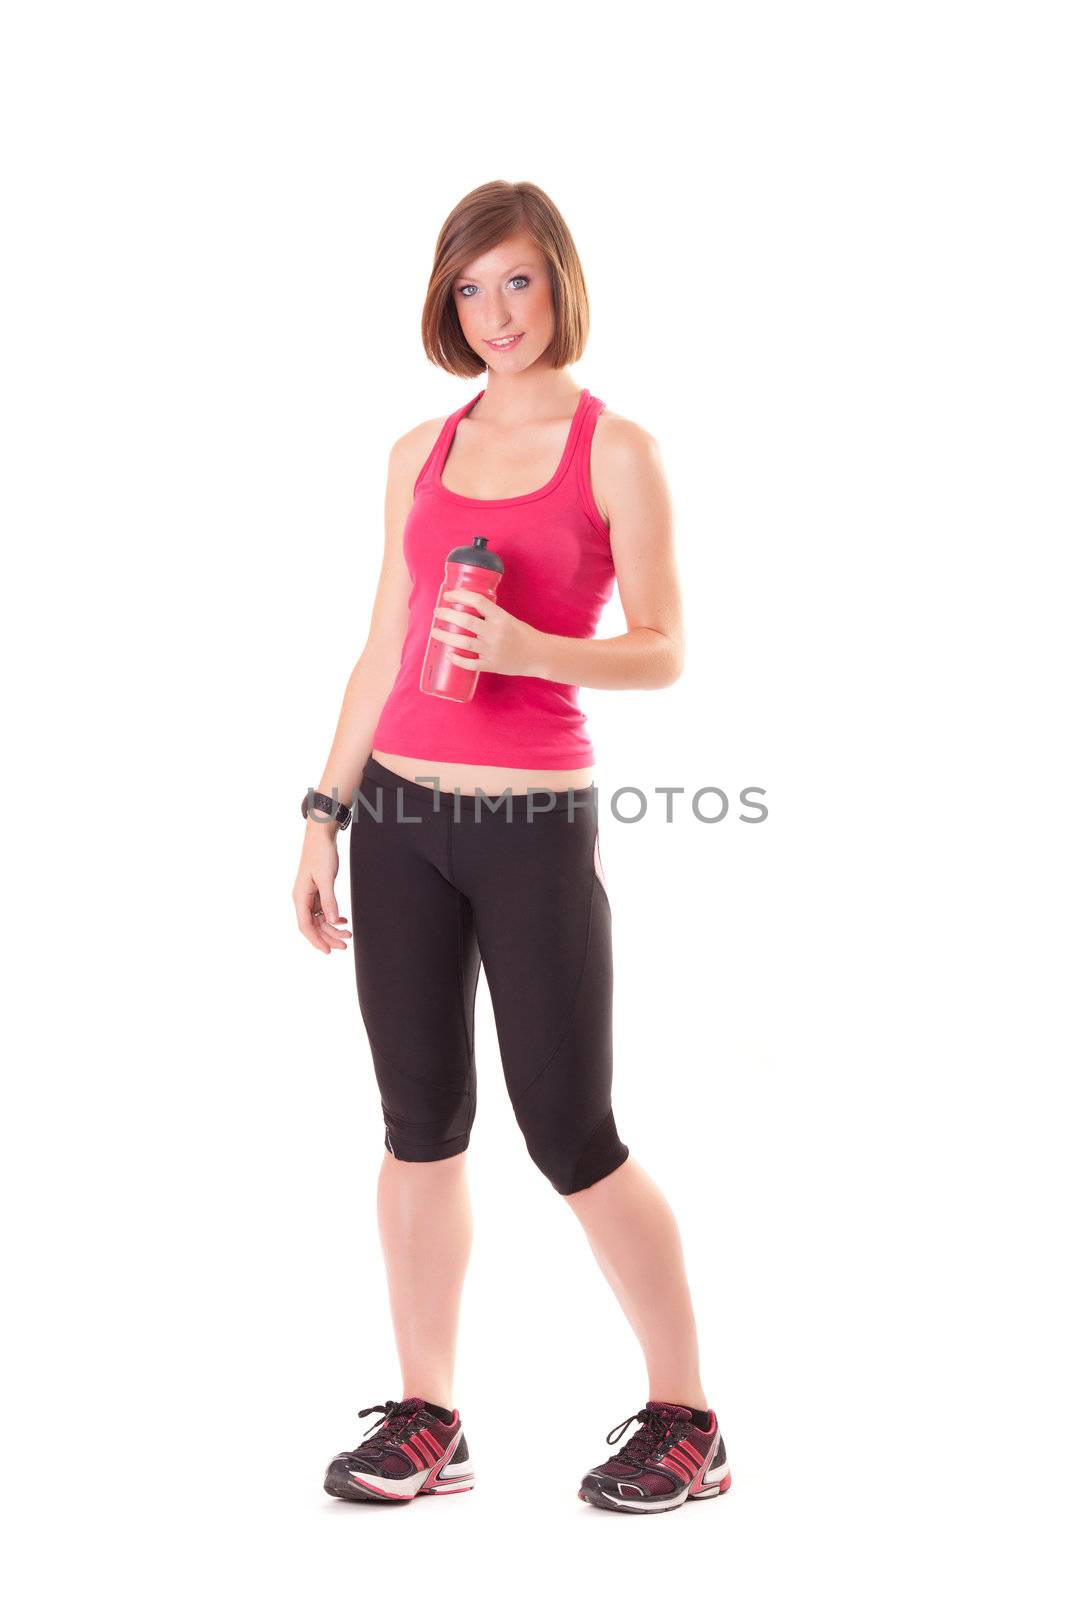 young beautiful sport woman standing with a bottle isolated on w by Lcrespi